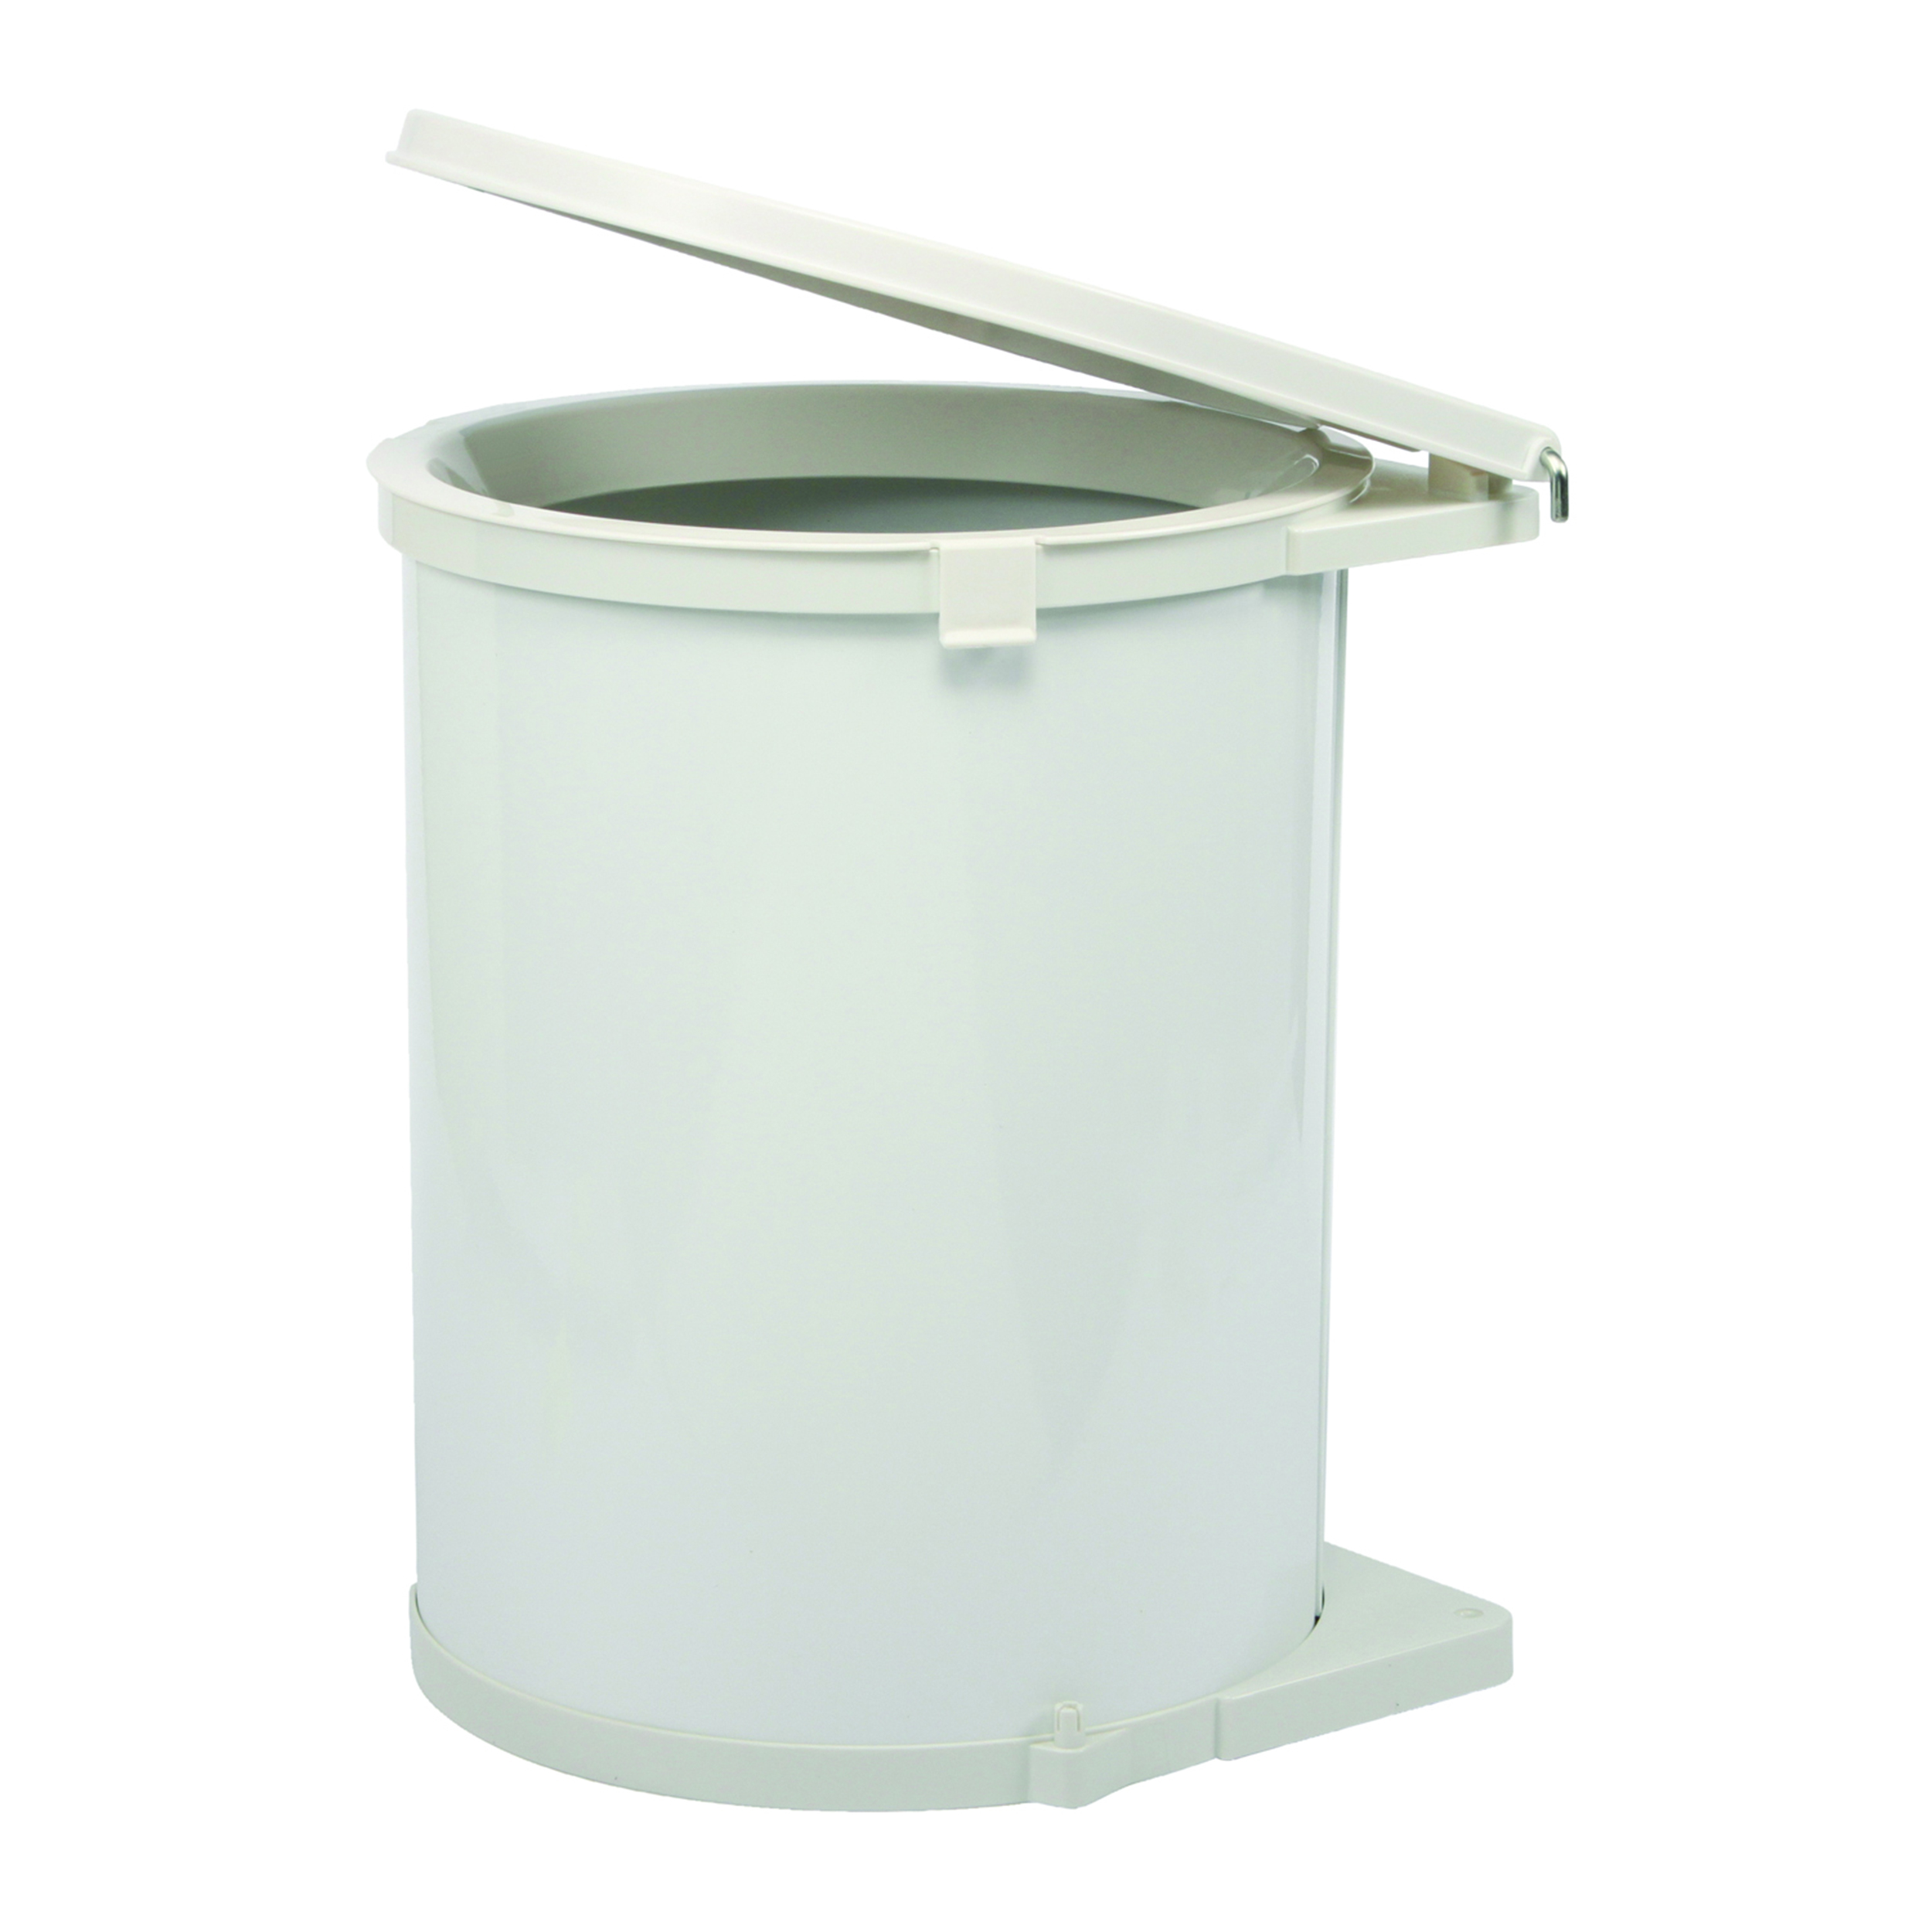 Real Solutions Single 32qt Pivot-out Waste & Recyling Unit With Lid, White